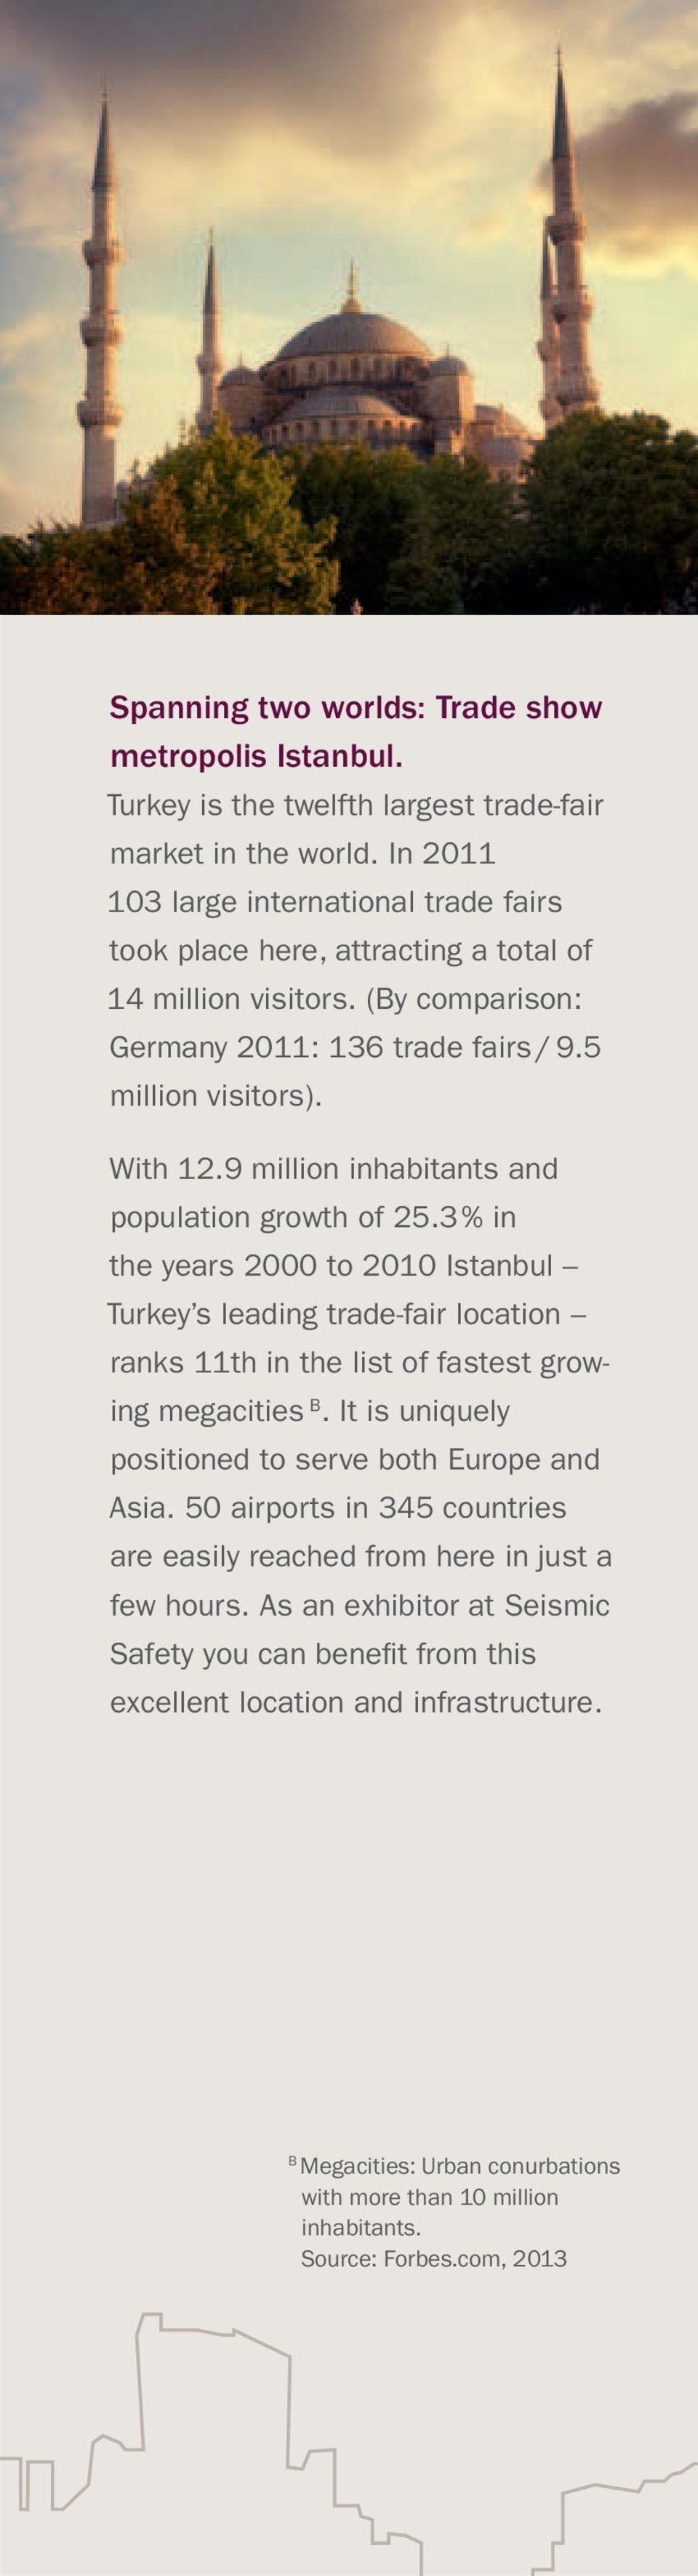 9 million inhabitants and population growth of 25.3 % in the years 2000 to 2010 Istanbul Turkey s leading trade-fair location ranks 11th in the list of fastest growing megacities B.